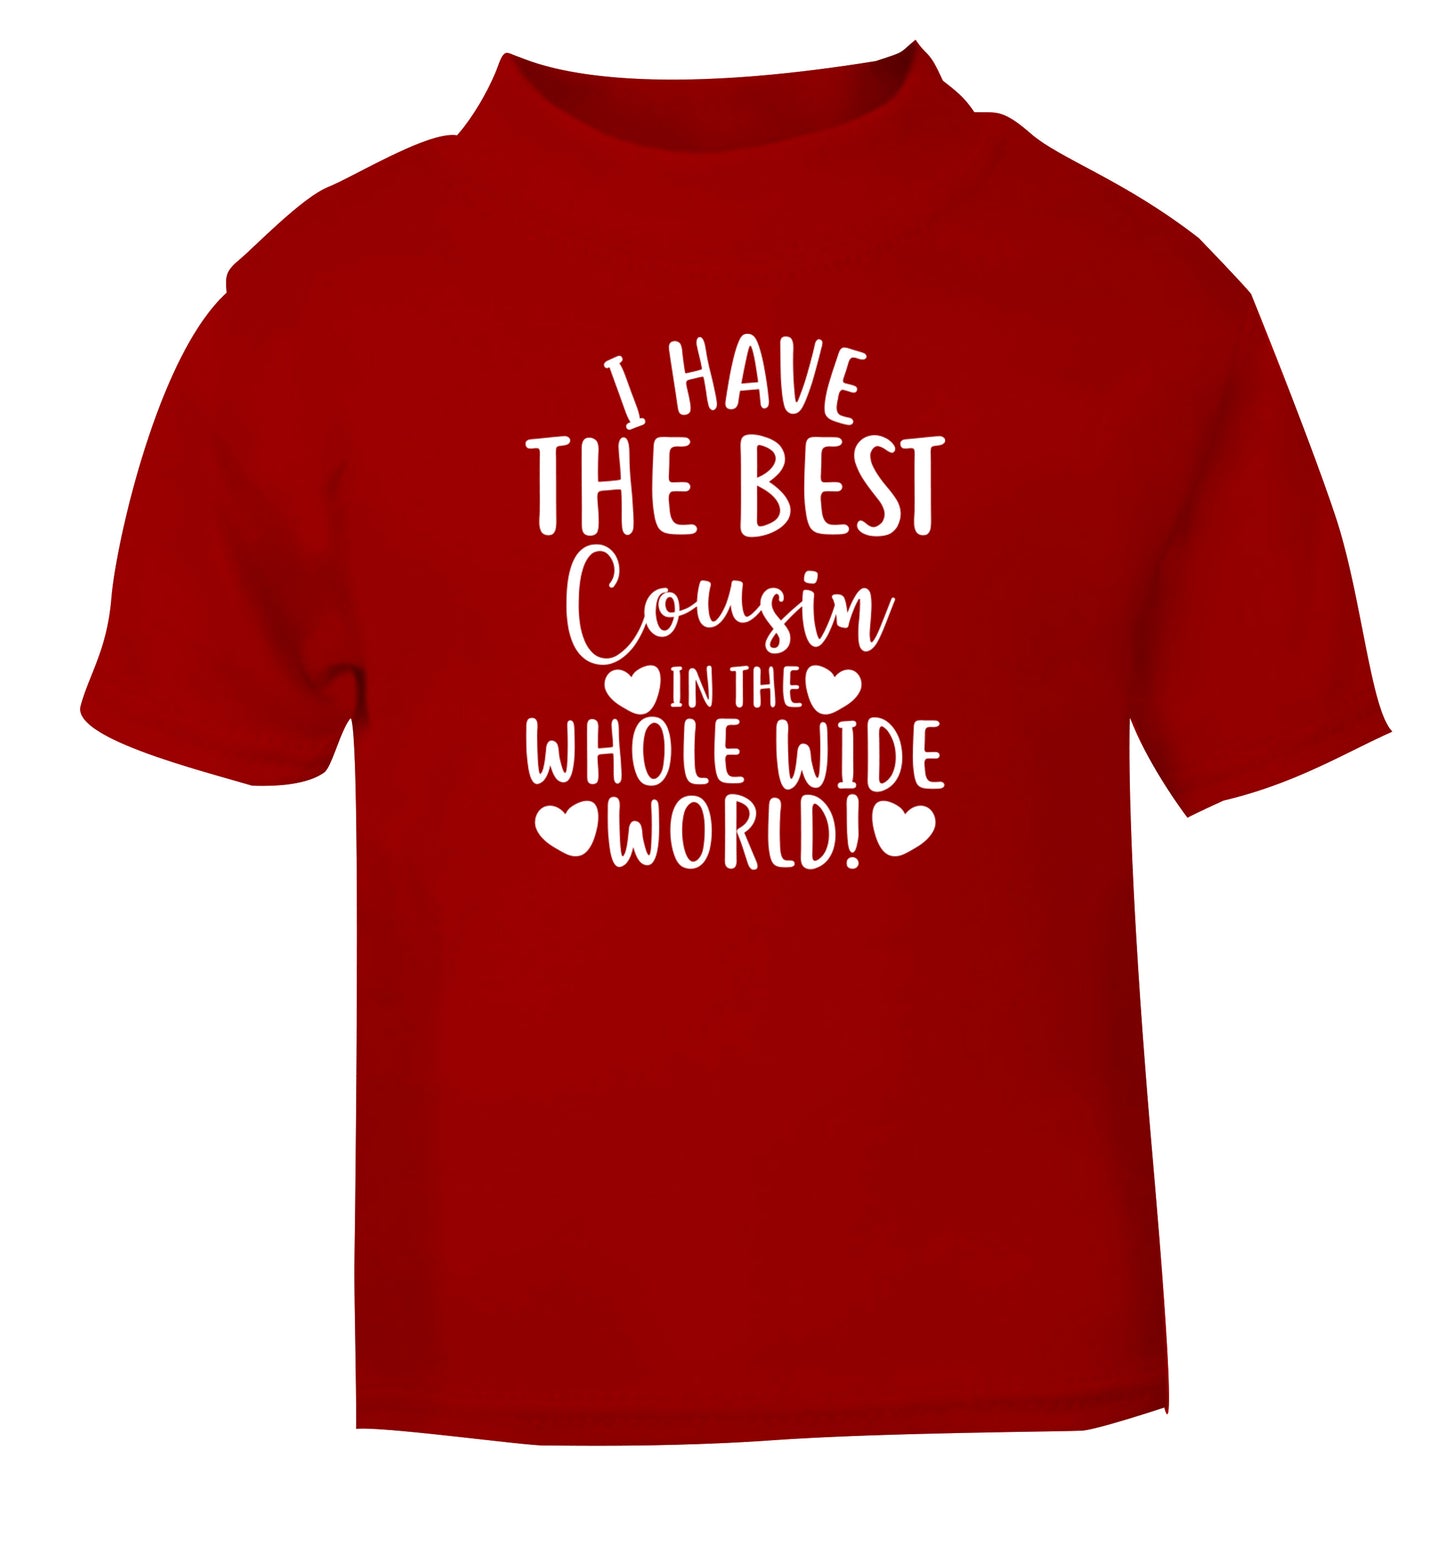 I have the best cousin in the whole wide world! red Baby Toddler Tshirt 2 Years